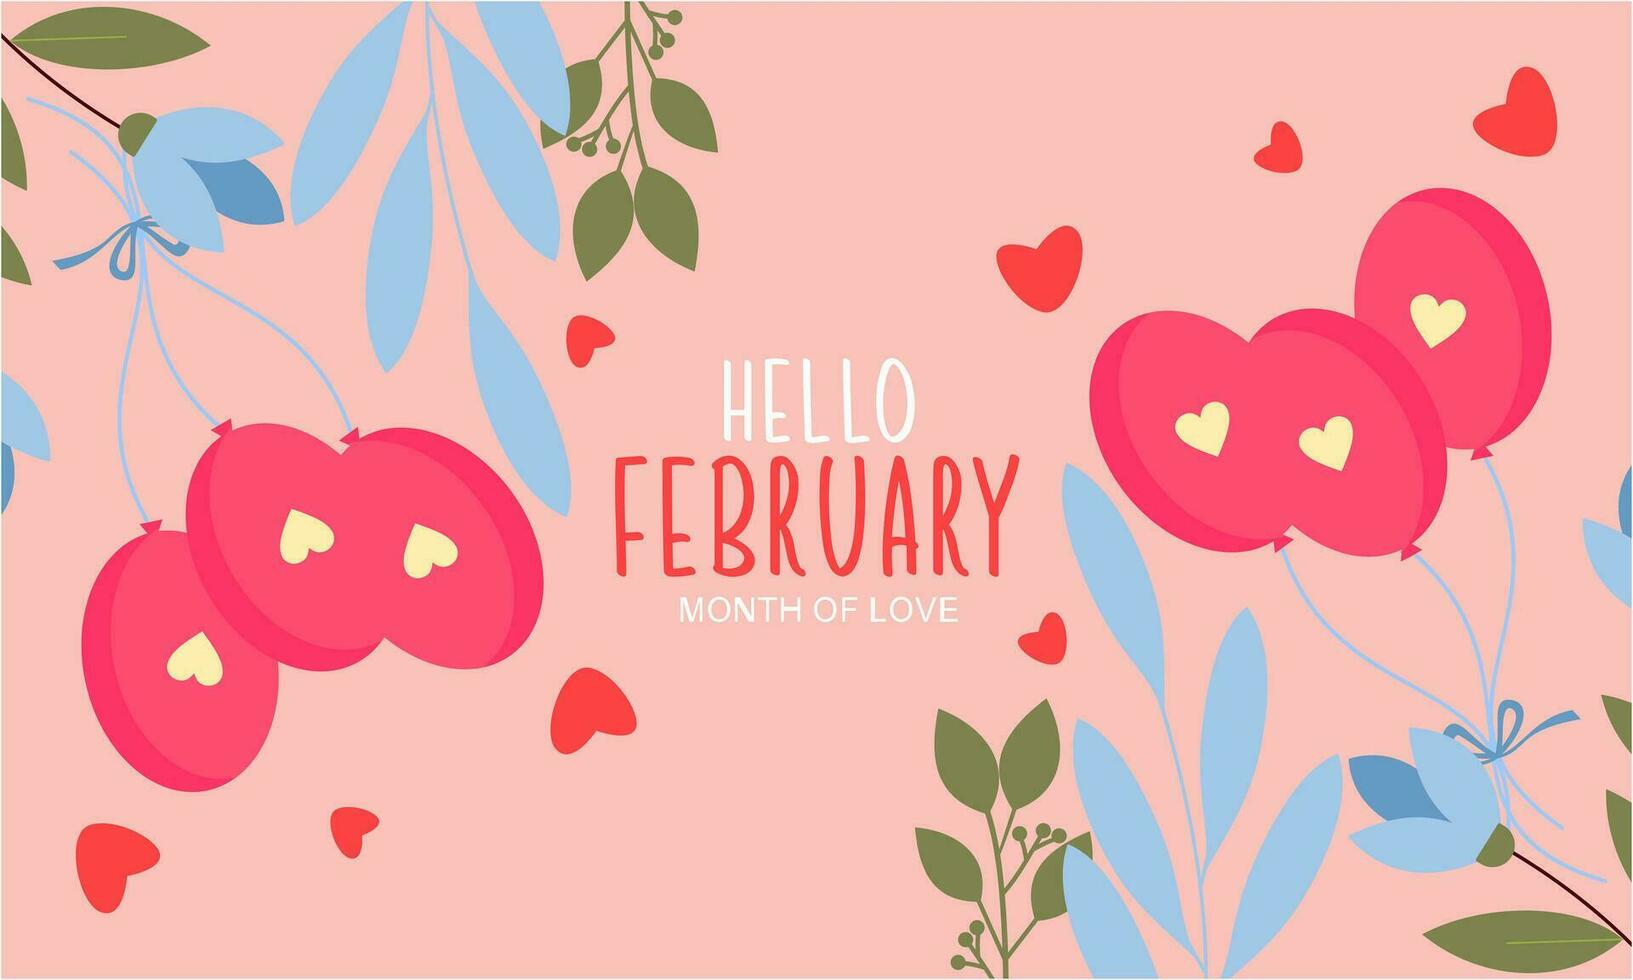 February month of love background vector